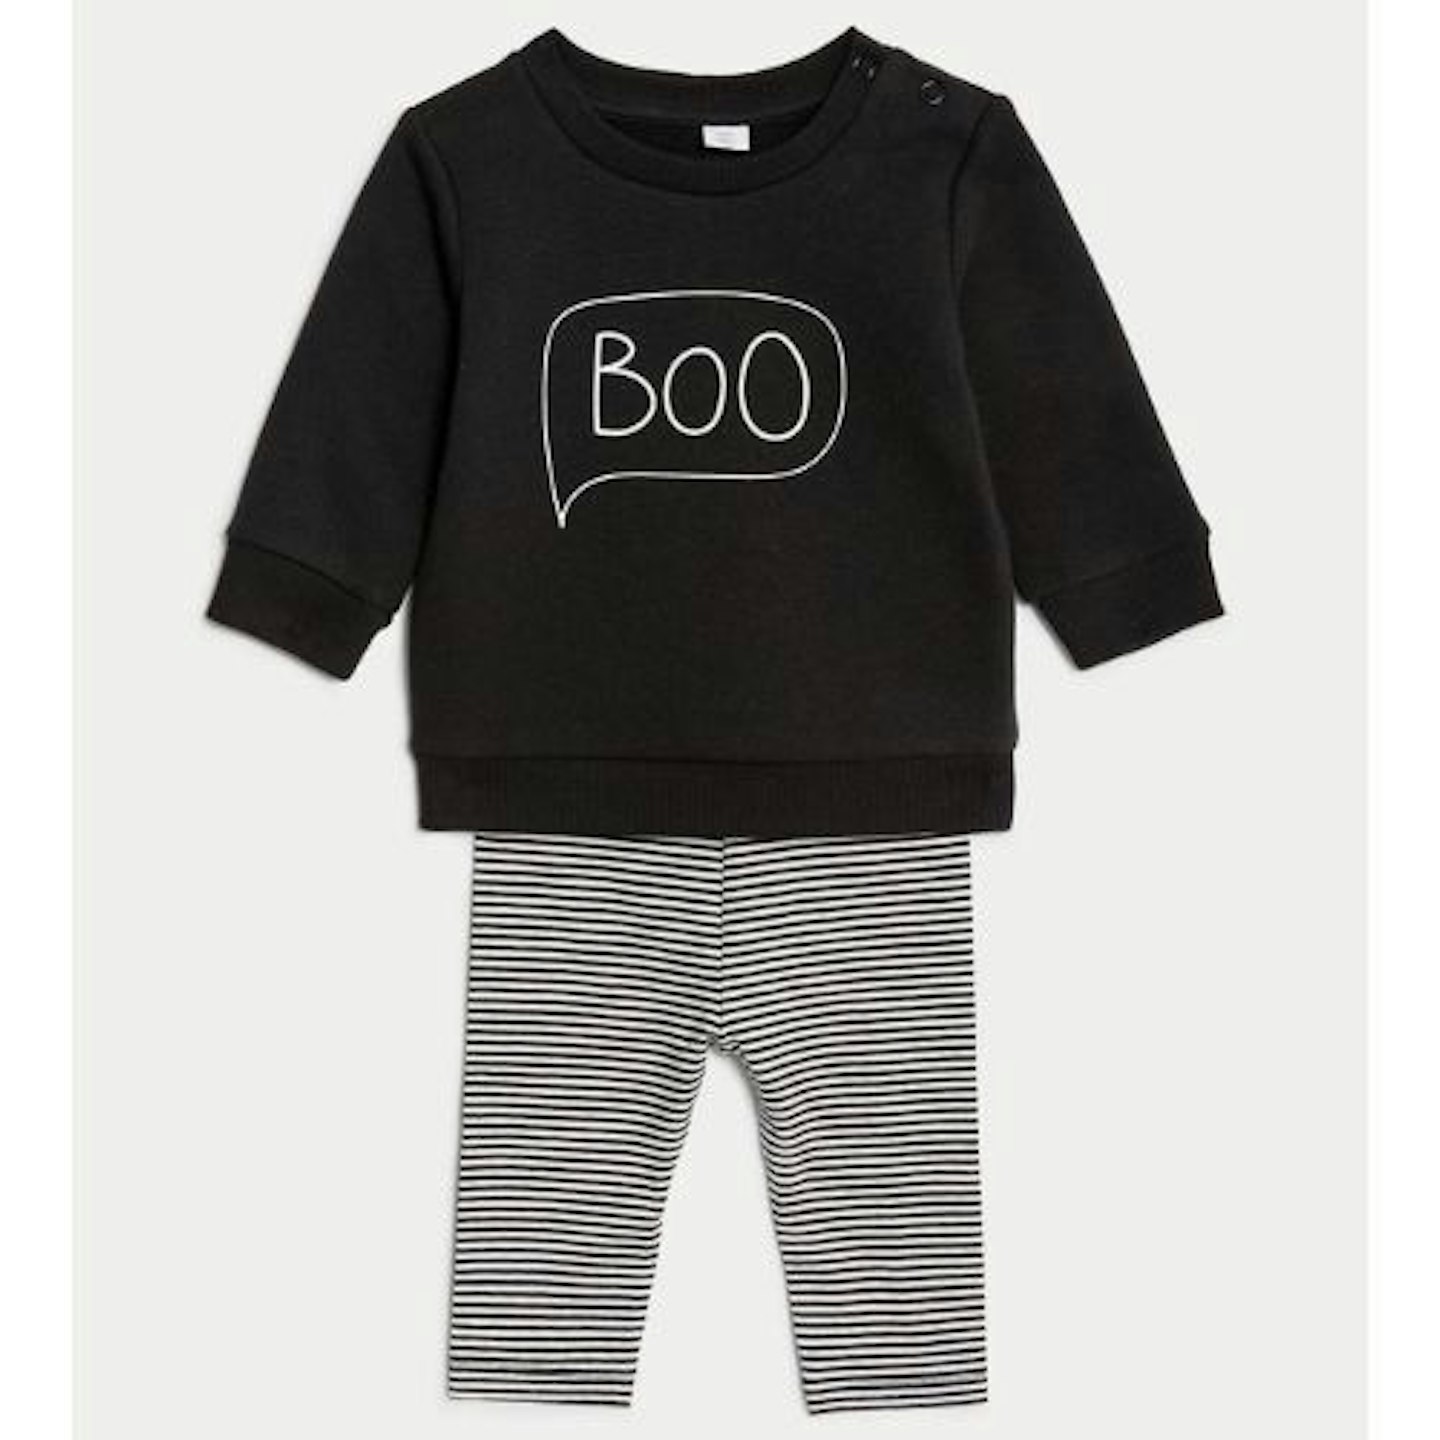 Kids Halloween Costumes: 2pc Cotton Rich Boo Slogan Striped Outfit